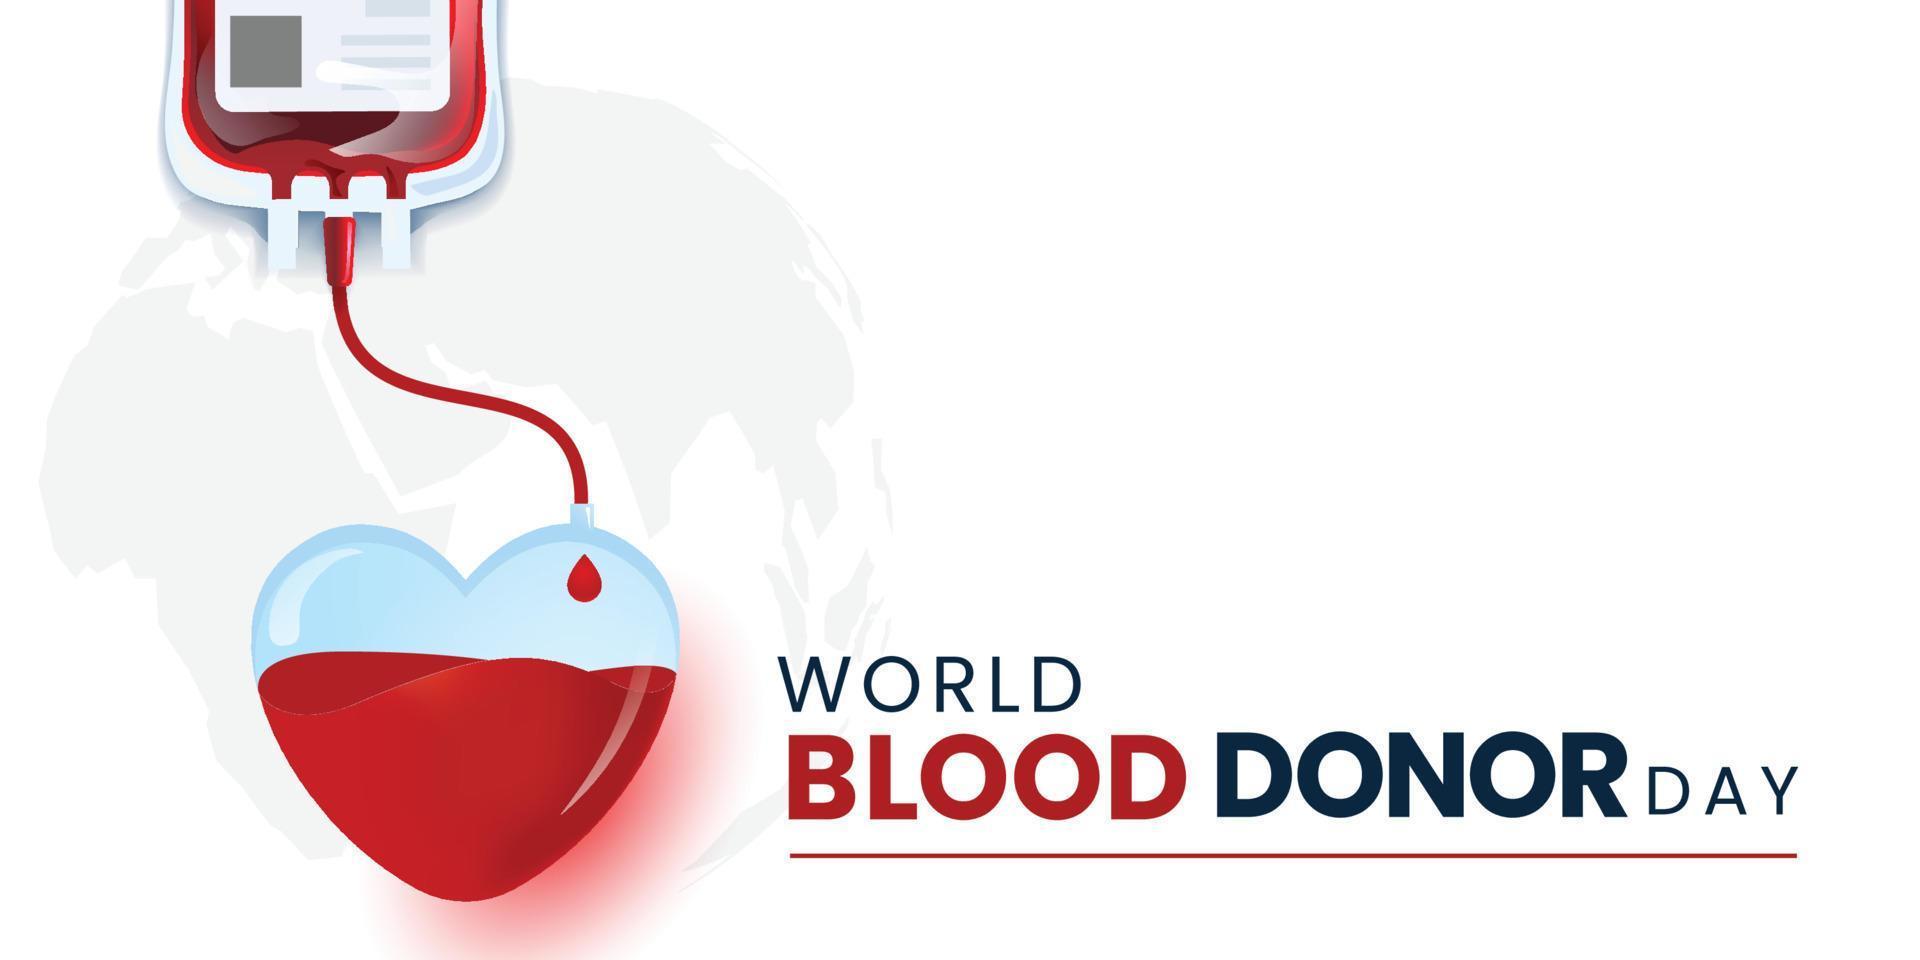 Blood donation illustration concept with blood bag. World blood donor day. vector